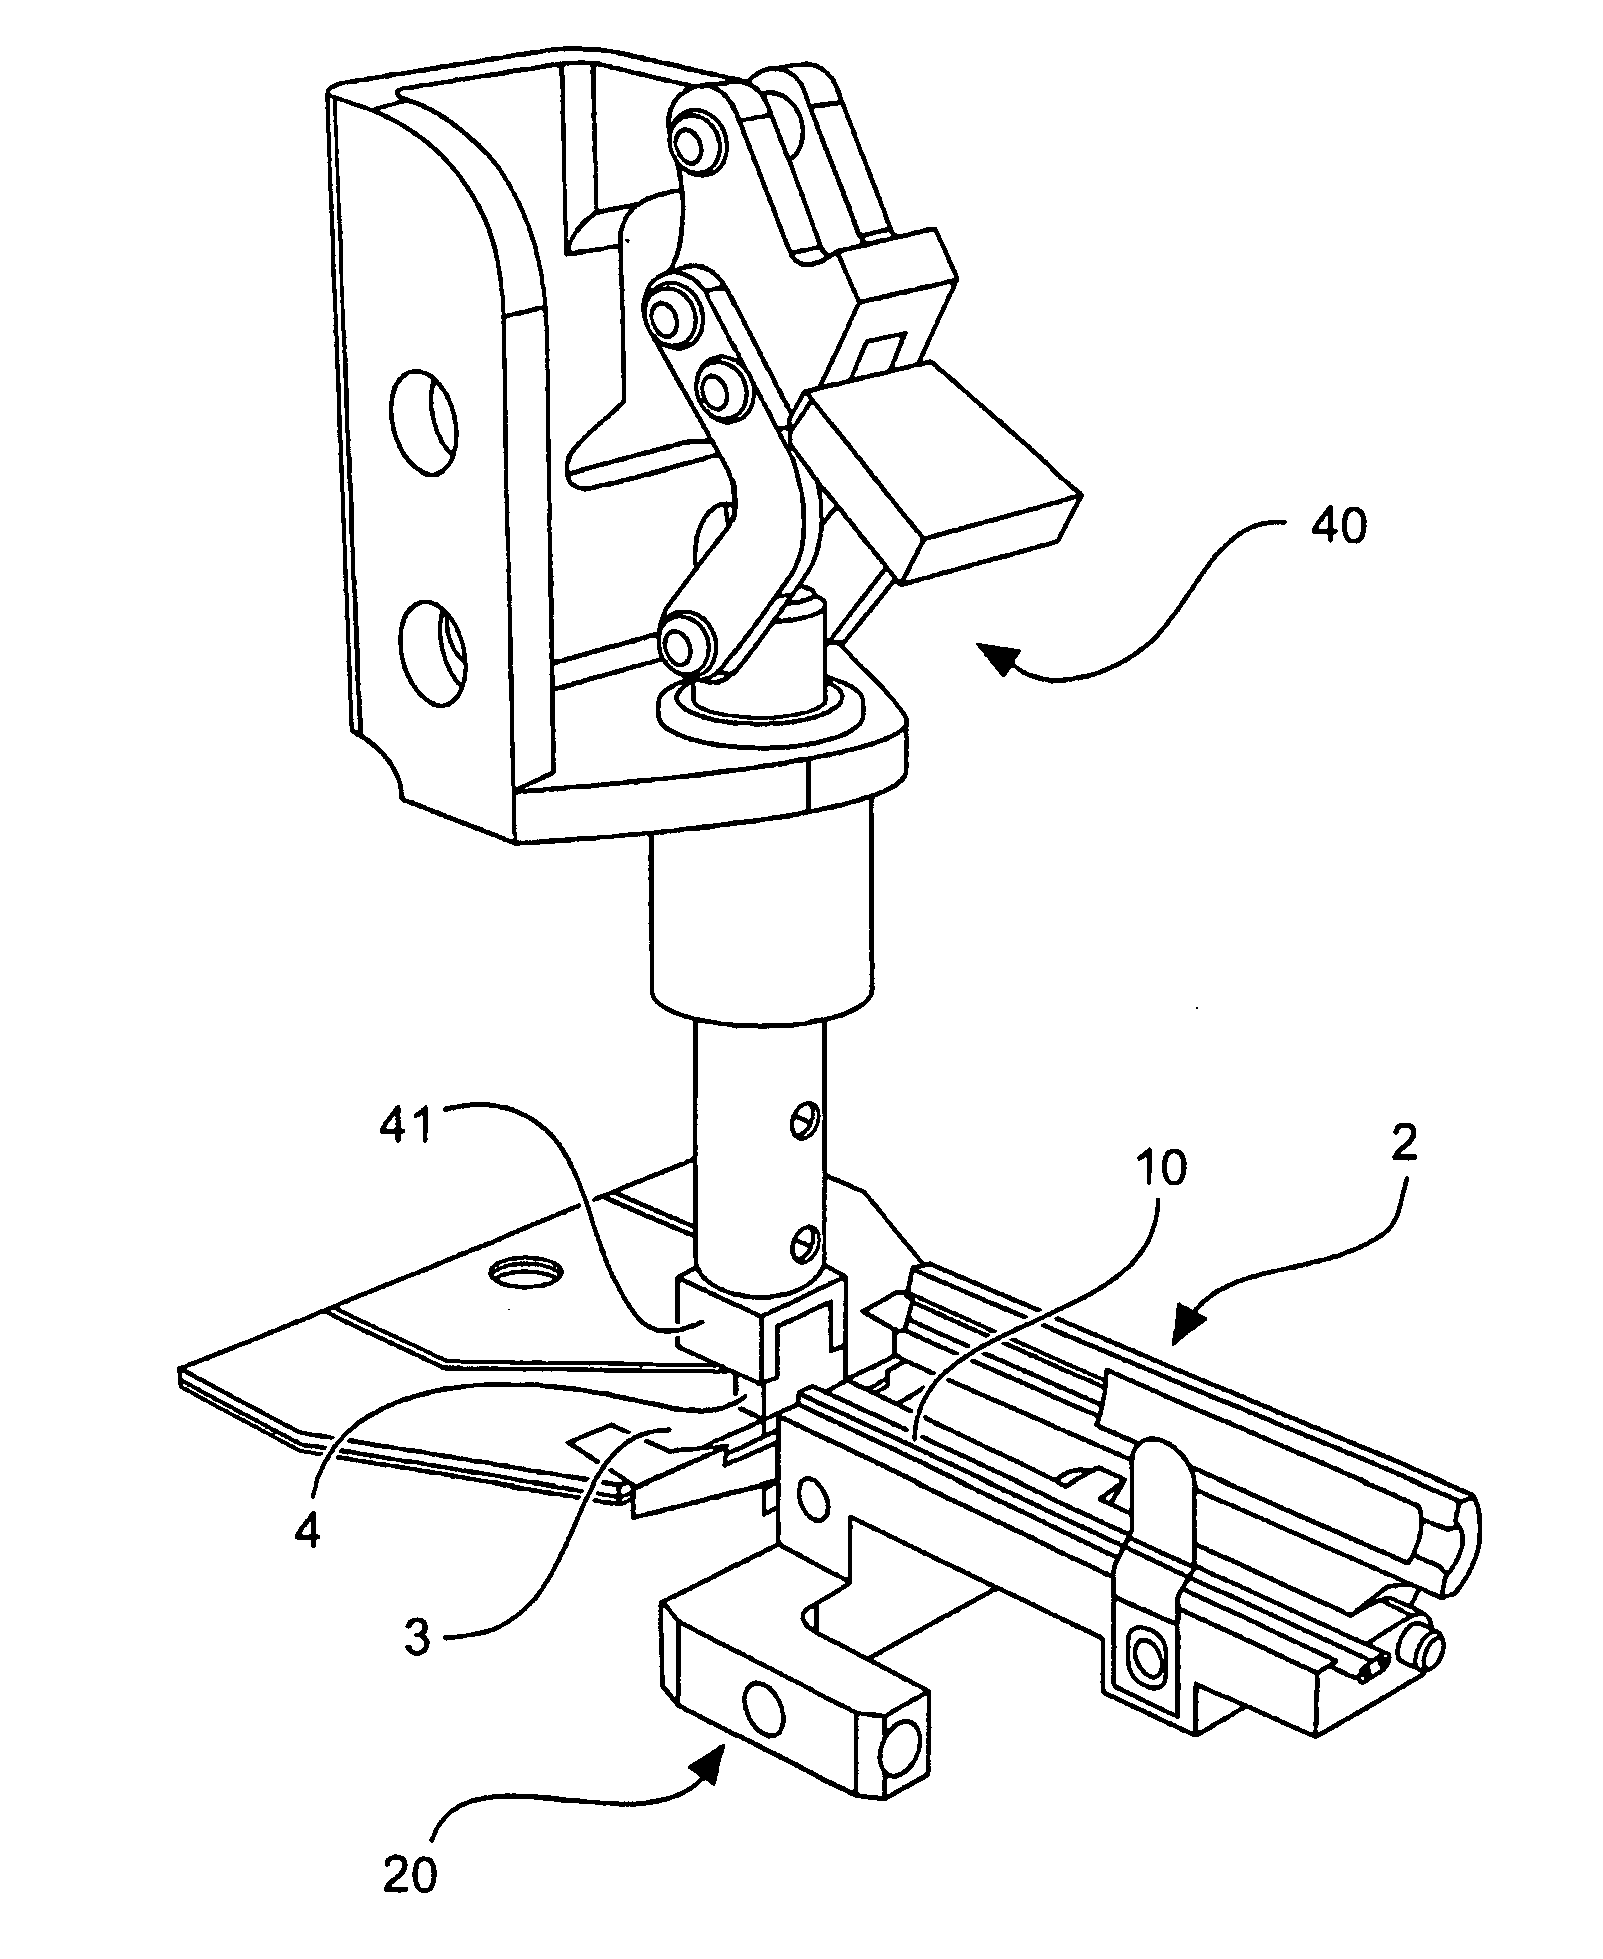 Device and a method for the reversible mechanical fixing and electrical contacting of electric conductors